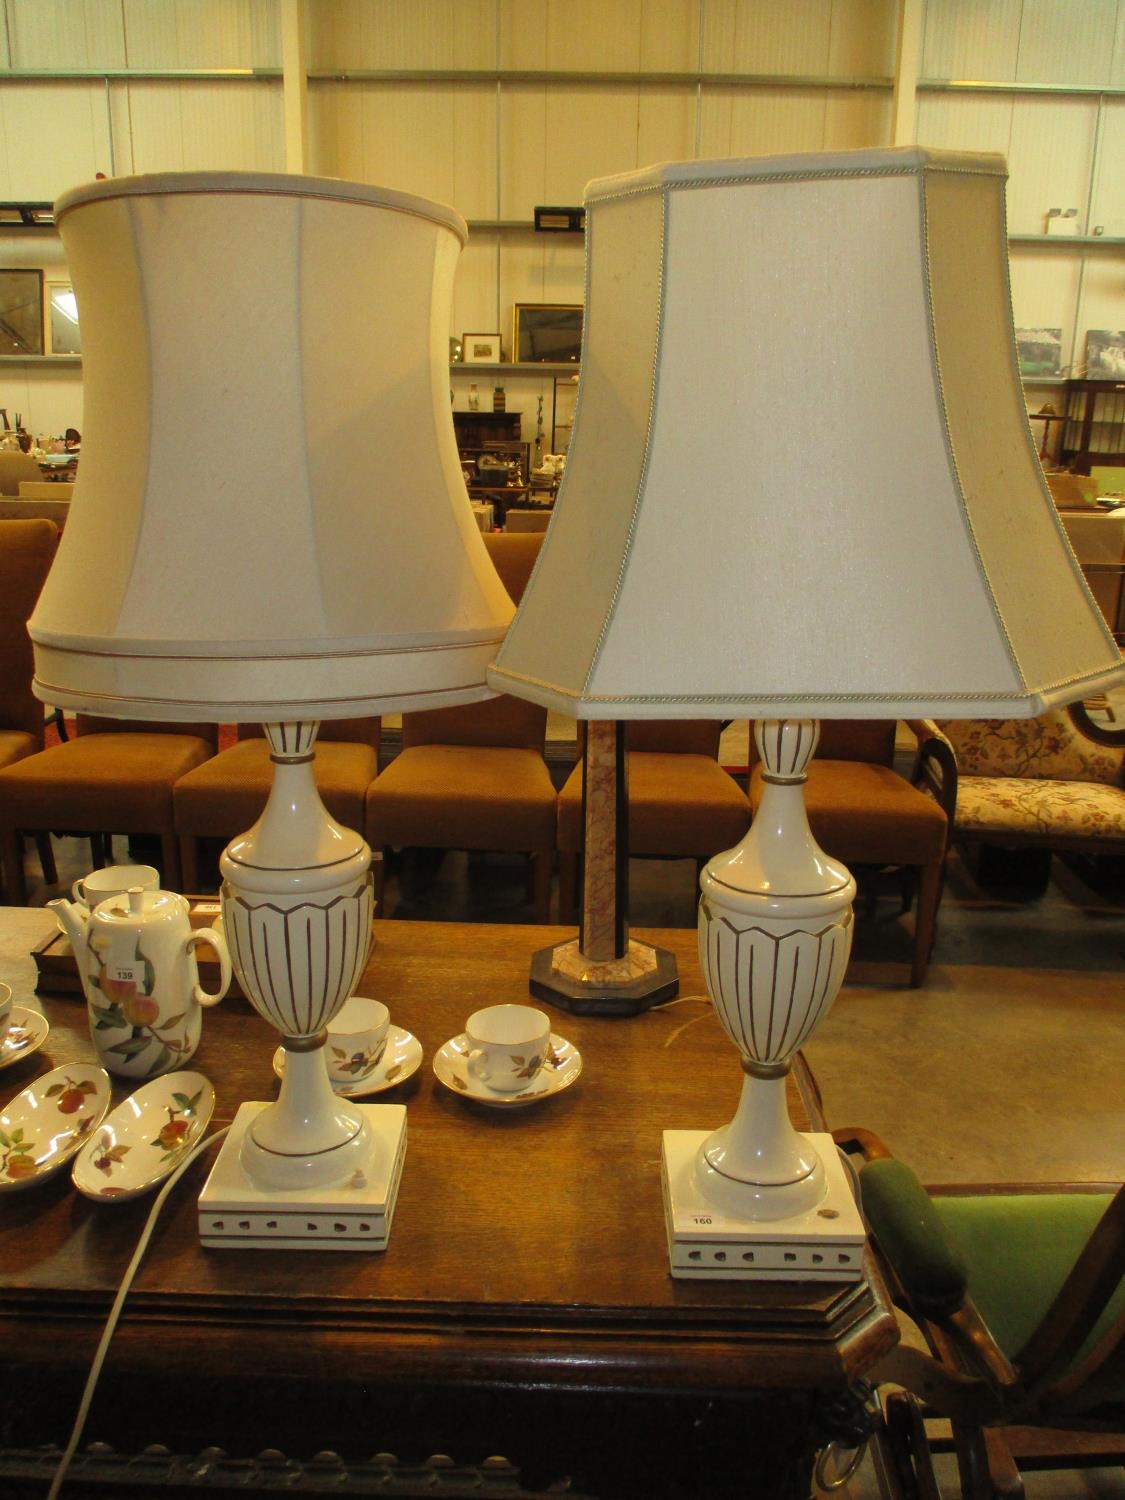 Pair of Urn Shape Table Lamps with Shade